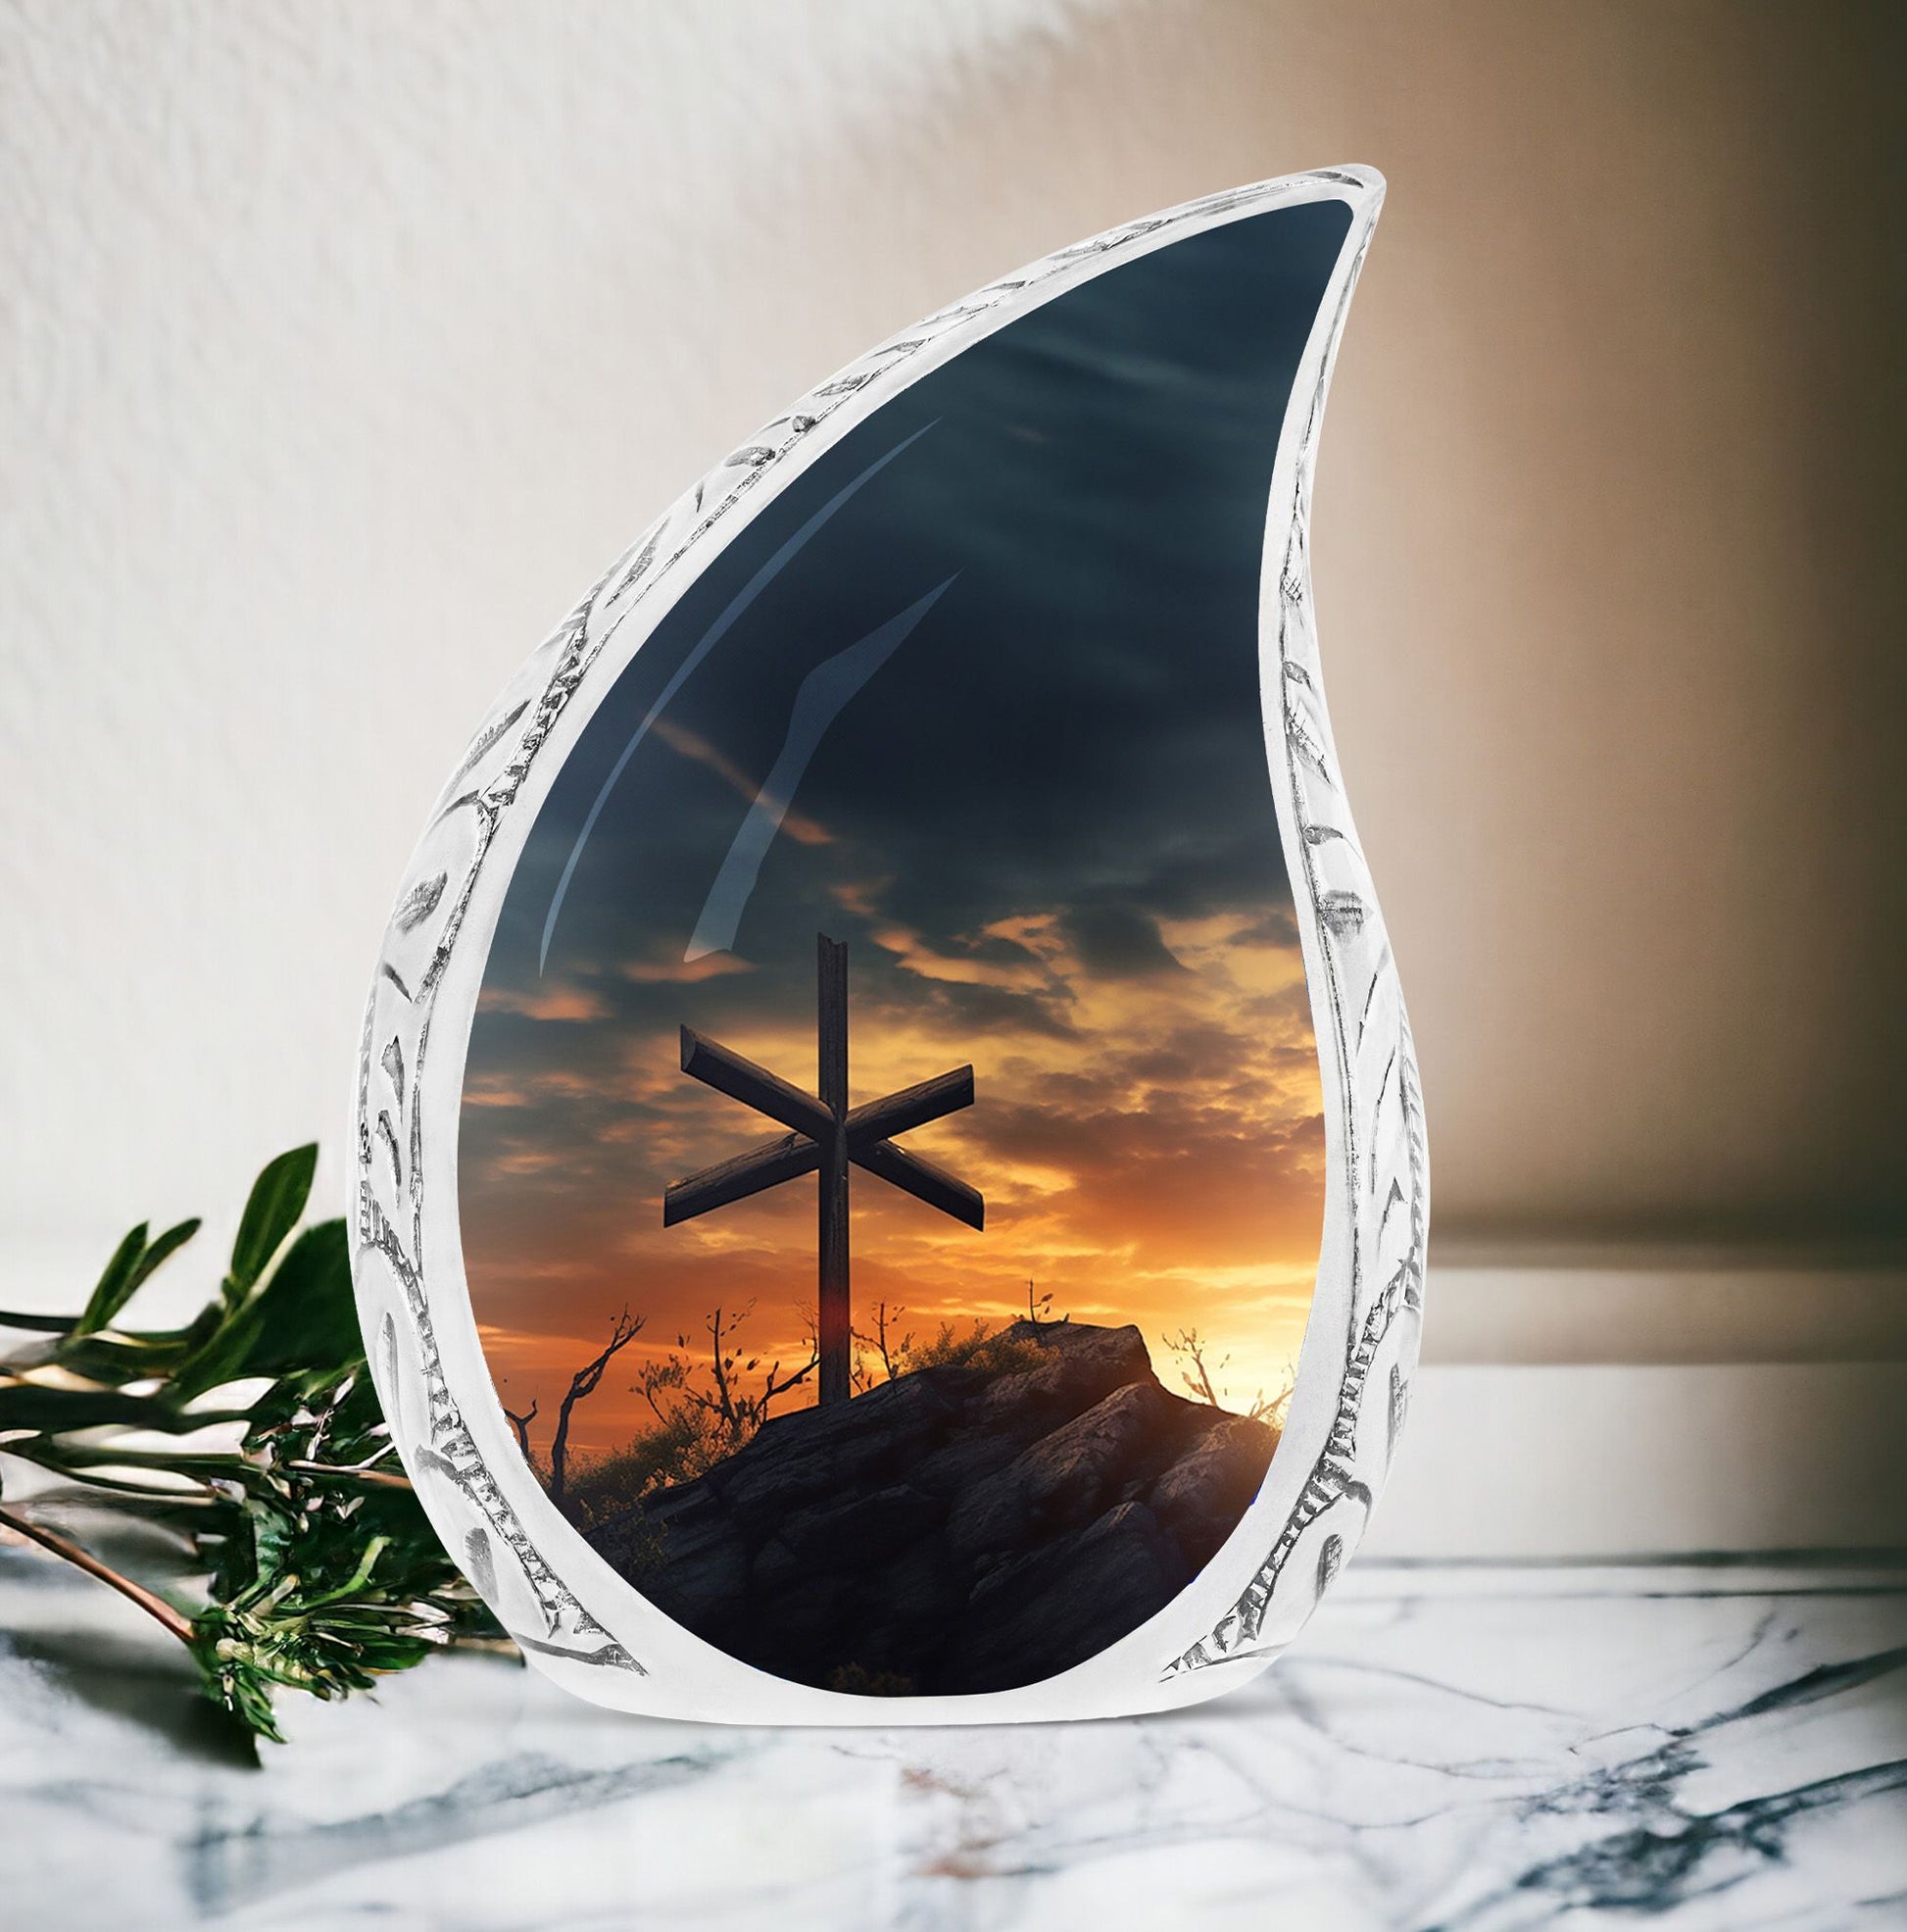 Large Christ themed urn painted with sunset sky, designed for human ashes, suitable for women and burial purposes